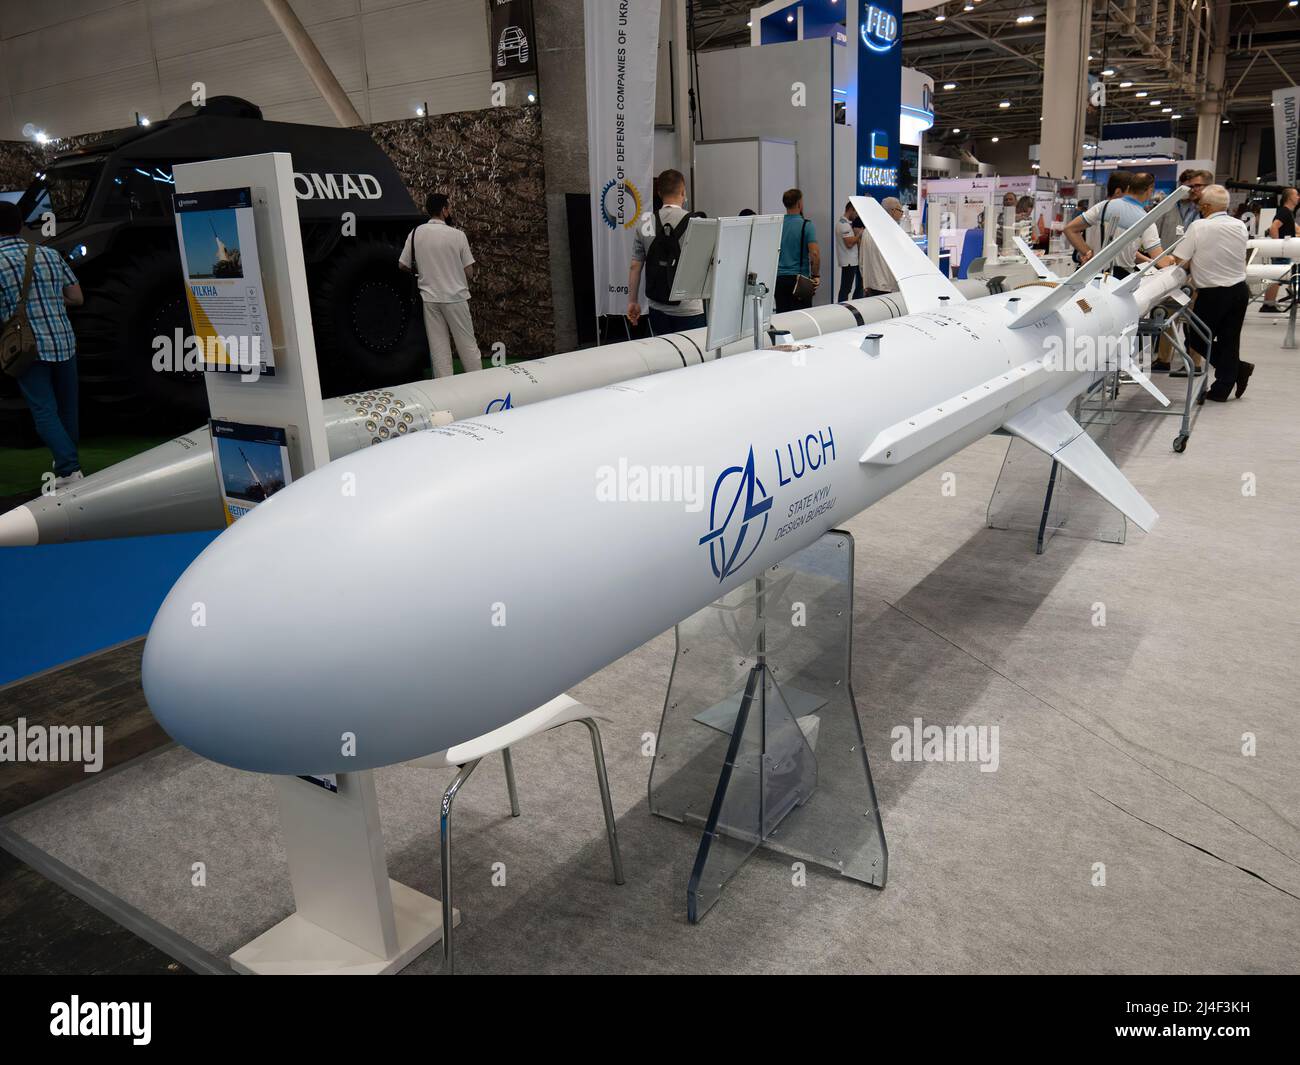 The Neptune R-360 anti-ship missile, on display at an arms exhibition in Kyiv, Ukraine. 2021. s a Ukrainian anti-ship cruise missile developed by Luch Design Bureau.  Neptune's design is based on the Soviet Kh-35 anti-ship missile, with substantially improved range and electronics..The system is designed to defeat surface warships and transport vessels with a displacement of up to 5,000 tons, either in convoys or moving individually.  The system entered service with the Ukrainian Navy in March 2021. PHOTO: Ukraine Defence Ministry Stock Photo